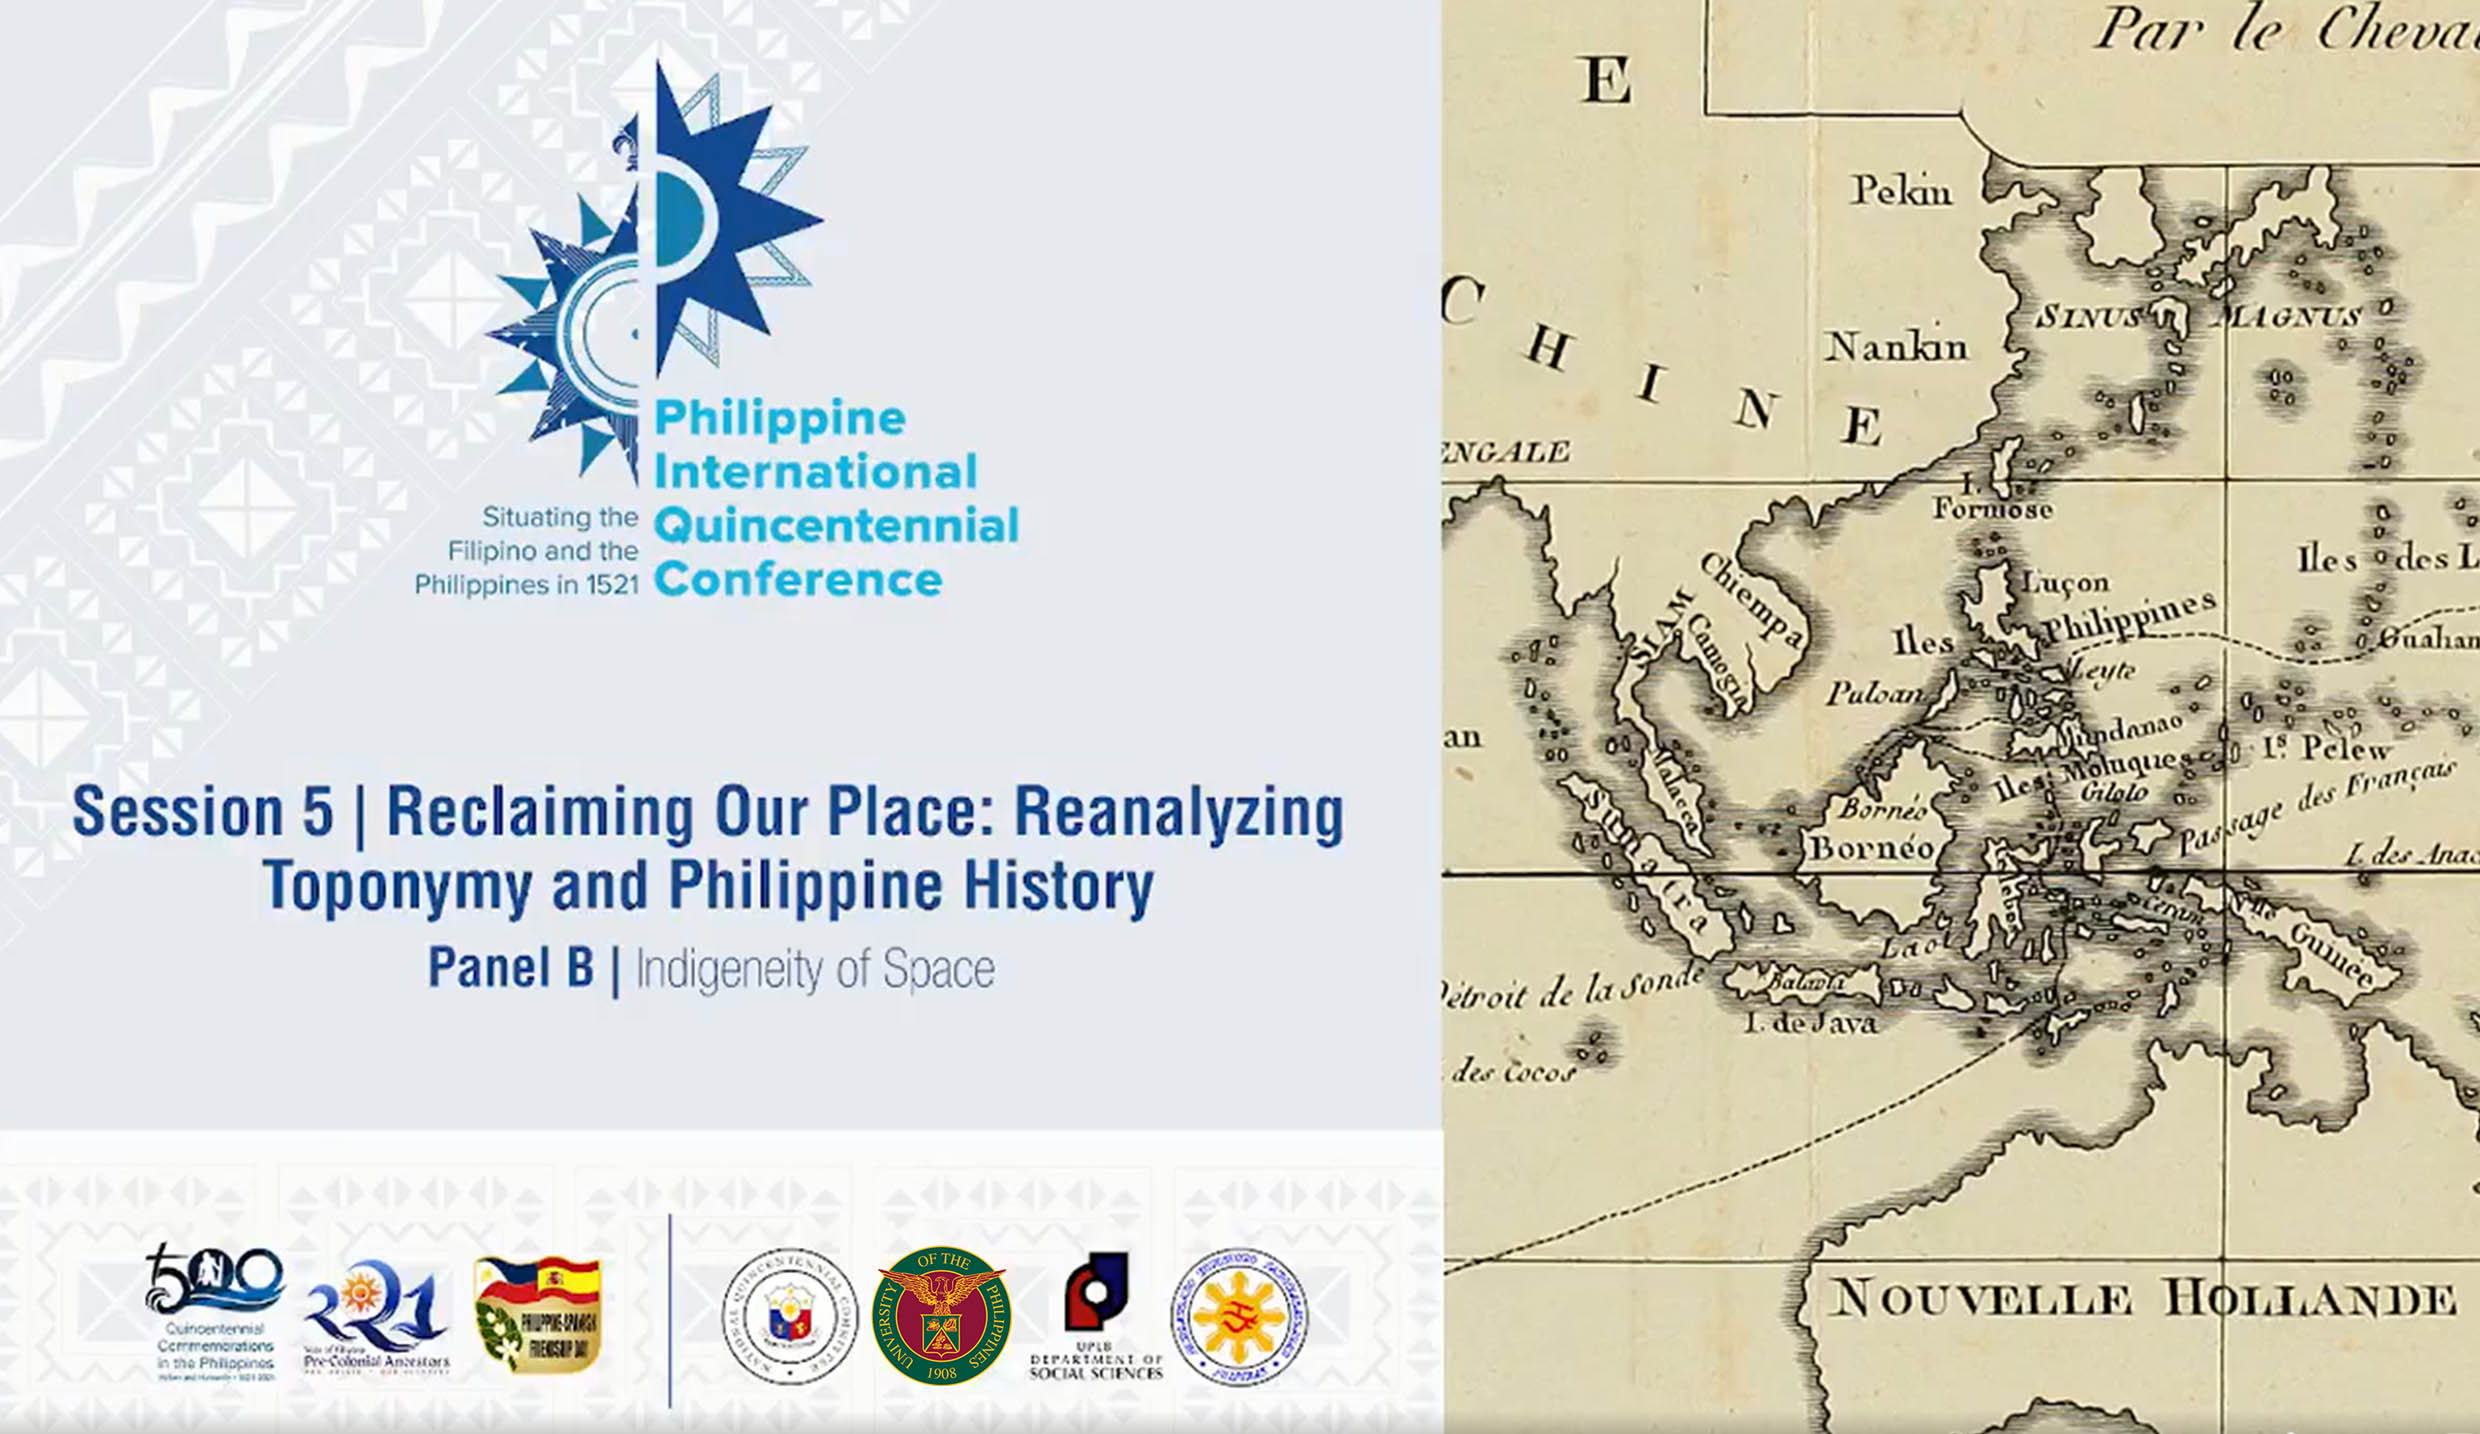 DSS convenes session 5 of the Phil. Intl. Quincentennial Conference